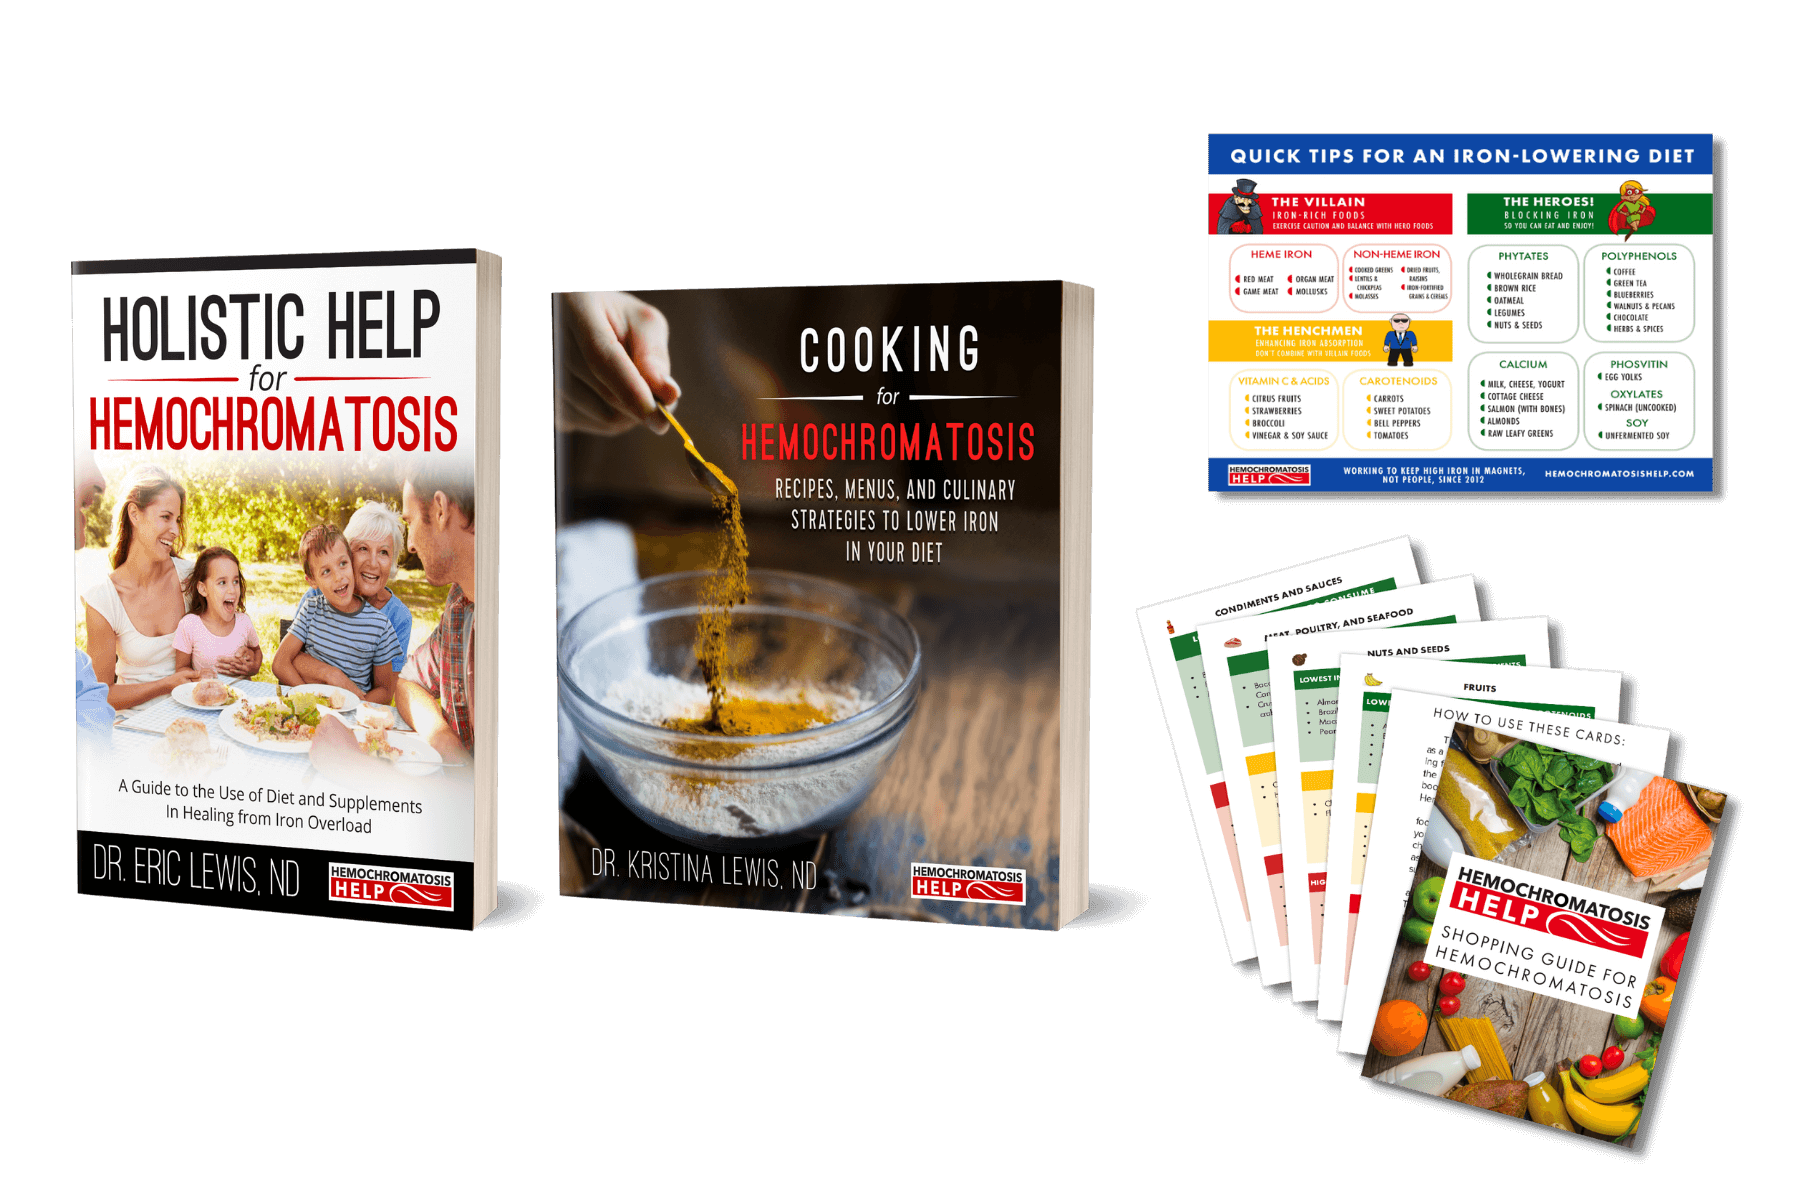 Complete Paperback Book Bundle: Holistic Help for Hemochromatosis & Cooking for Hemochromatosis Books + Bonus Grocery Shopping Guide & Quick Tips Magnet